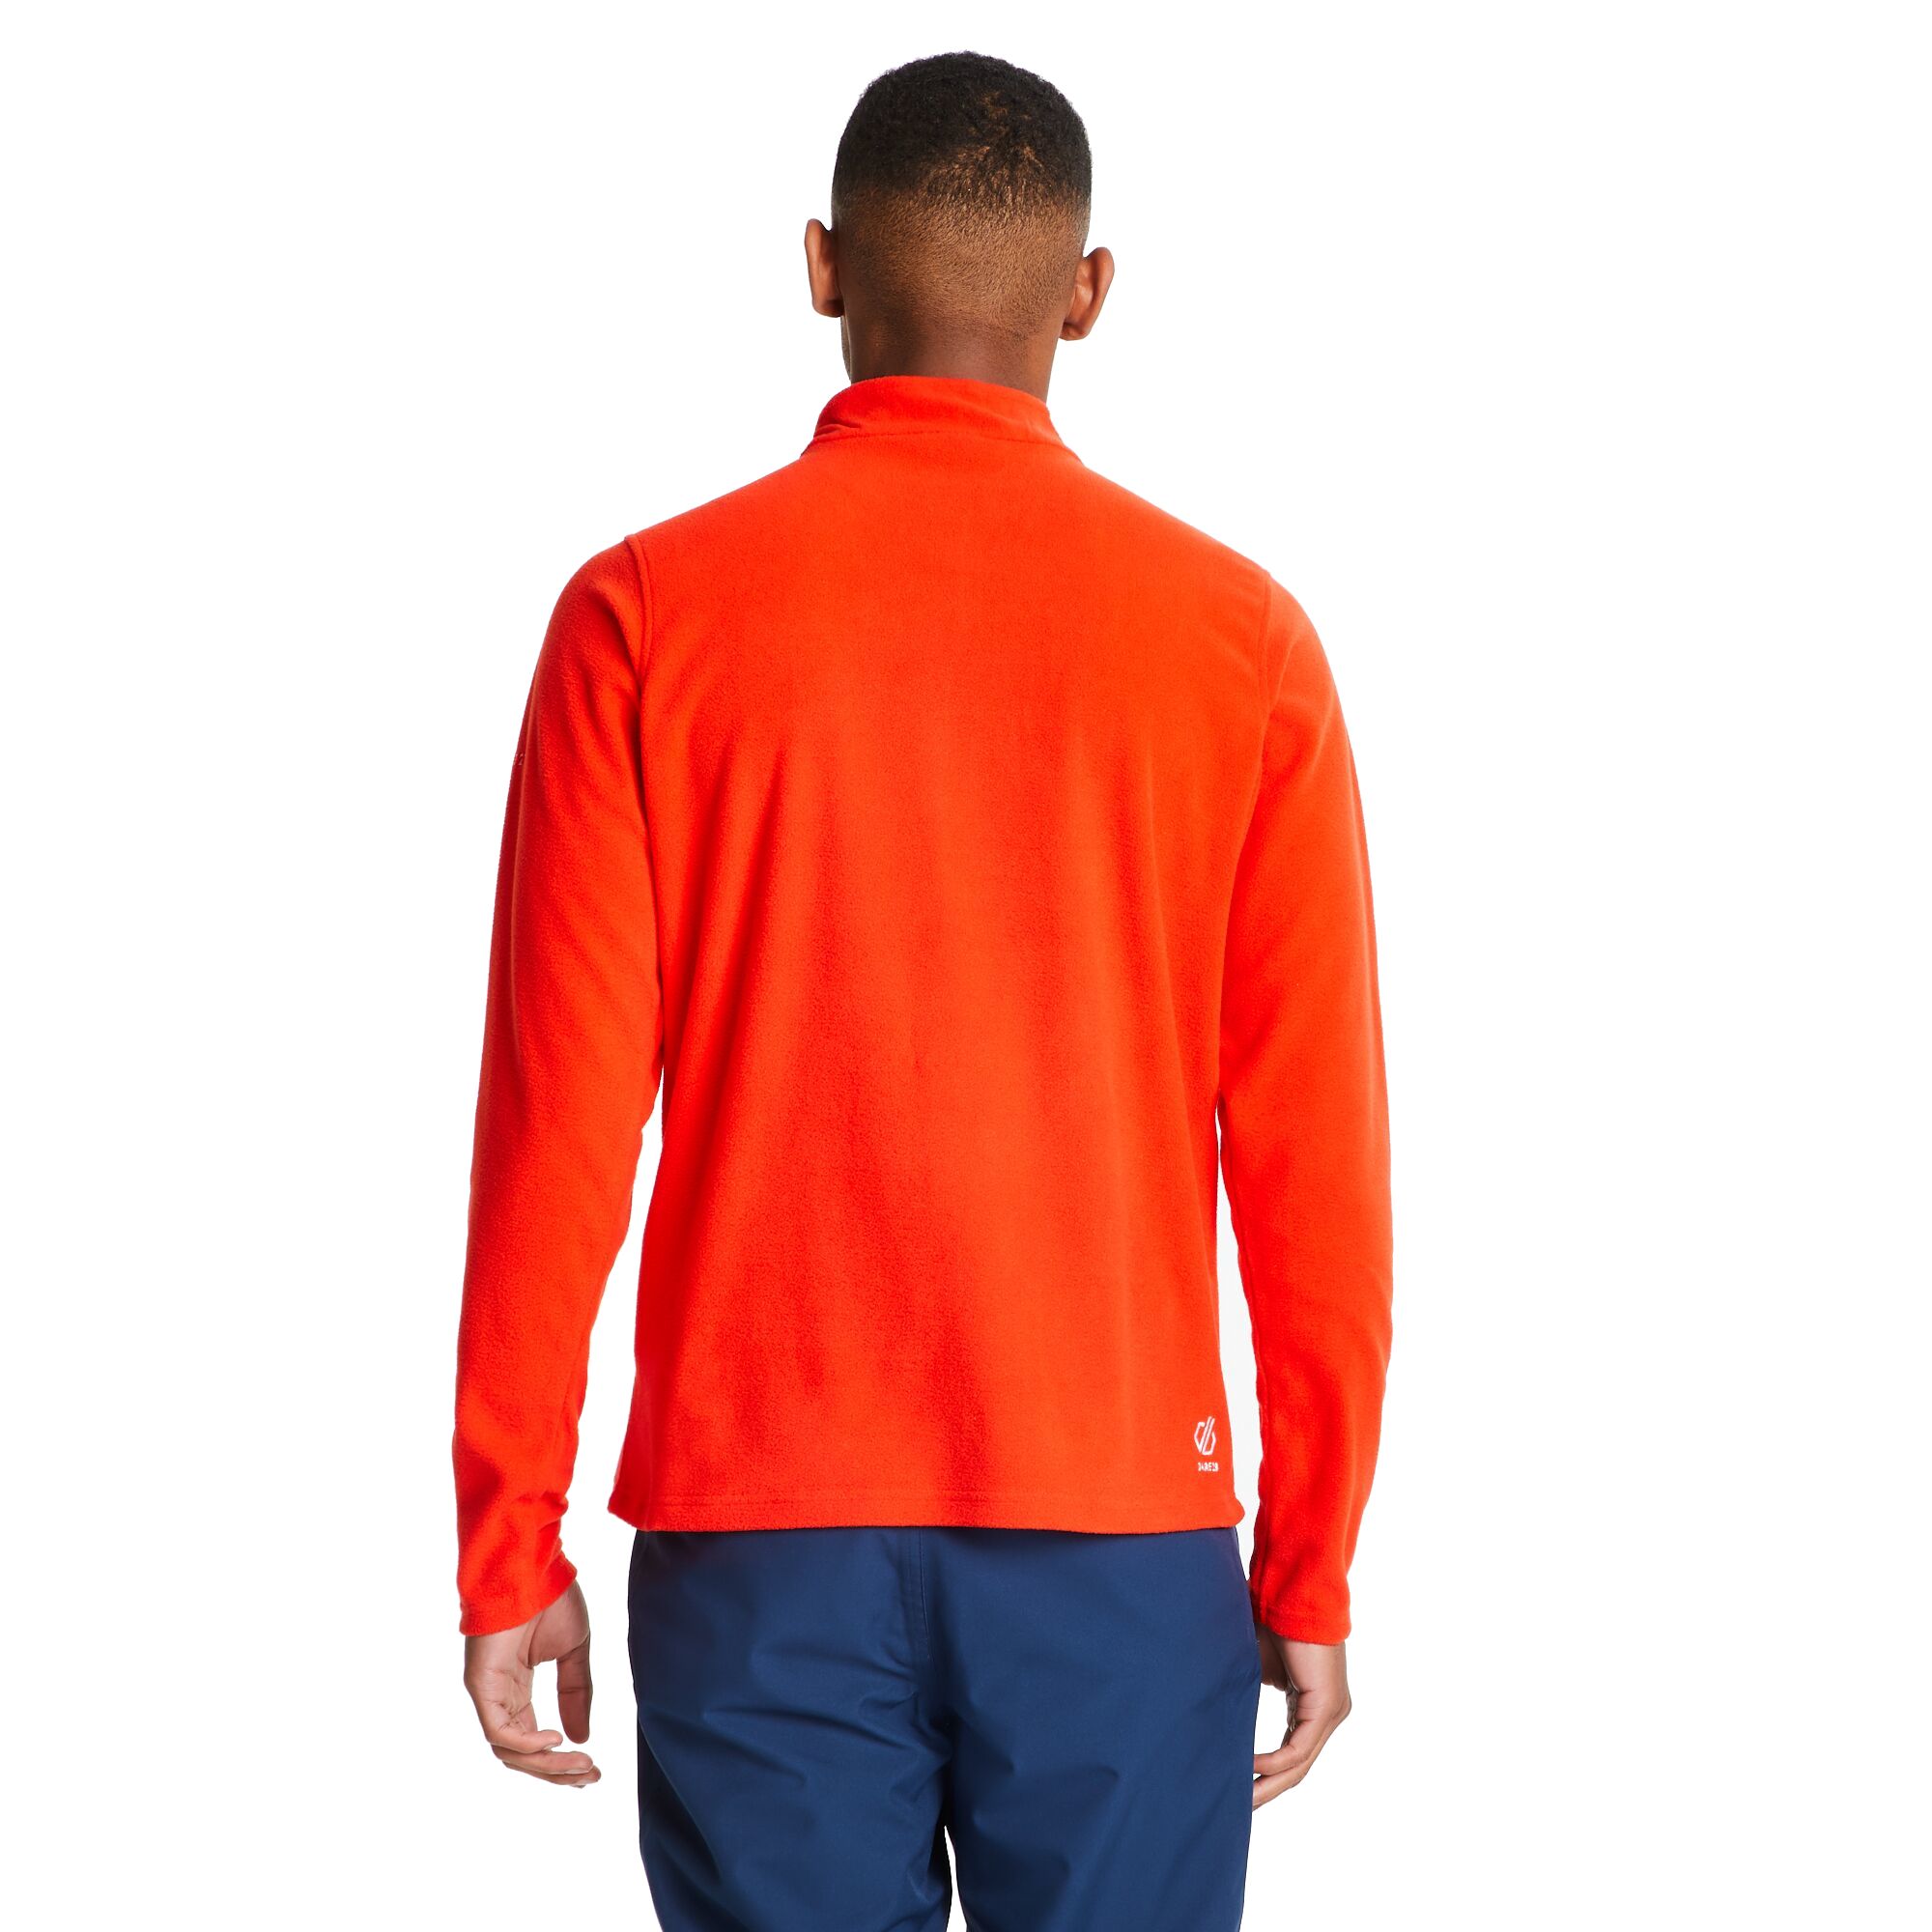 Material: 100% polyester fleece. With a quarter zip fastening. 1 side brushed/1 side anti pill - 170gsm. Half length zip with inner zip and chin guard. Size (chest): (XXS) 32-34in, (XS) 35-36in, (S) 37-38in, (M) 39-40in, (L) 41-42in, (XL) 43-44in, (XXL) 46-48in, (3XL) 49-51in, (4XL) 52-54in, (5XL) 55-57in, (6XL) 58-60in.